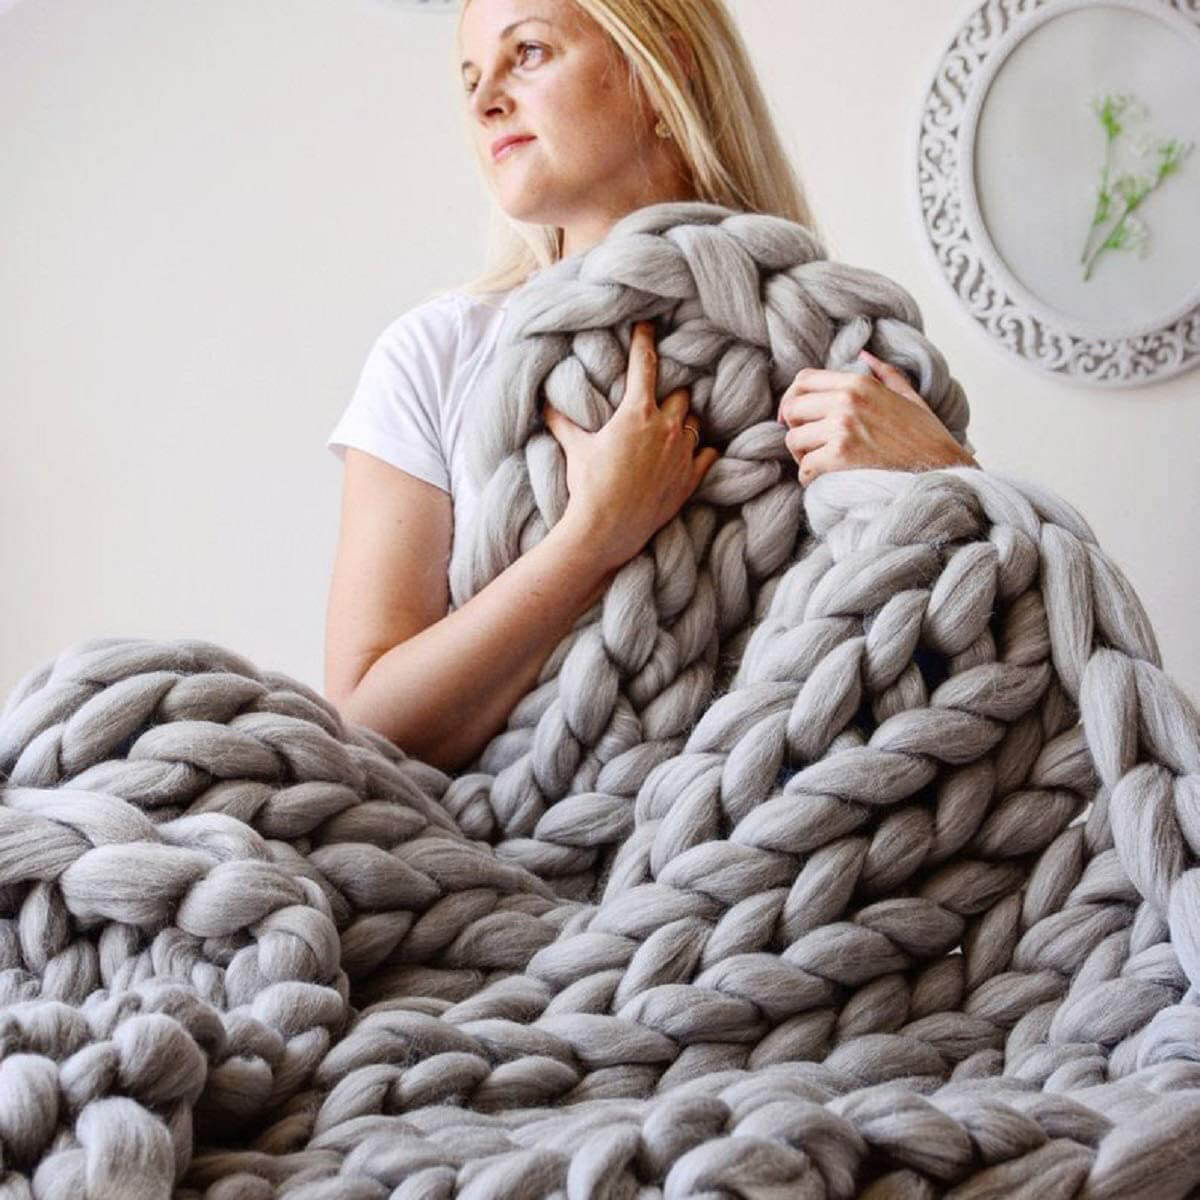 Chunky Knit Blanket Hand Made Throw Boho Bedroom Home Decor Giant Yarn, 39 inch*47 inch, Size: 39 x 47, White